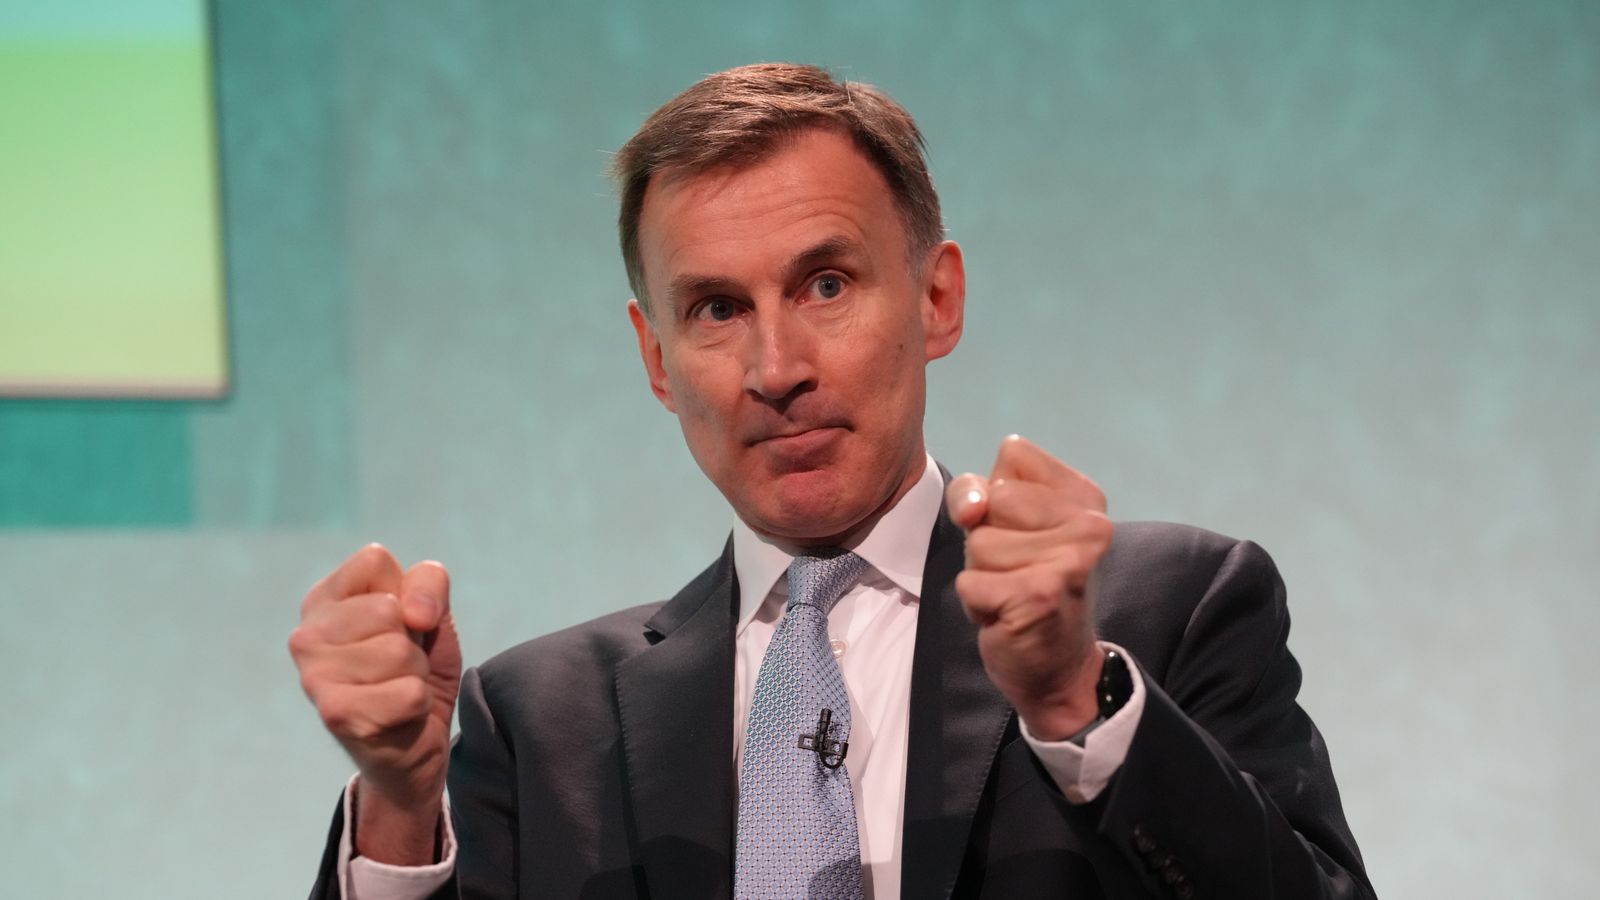 Jeremy Hunt says 'I don't yet know' if govt can cut taxes again before election after National Insurance reduction